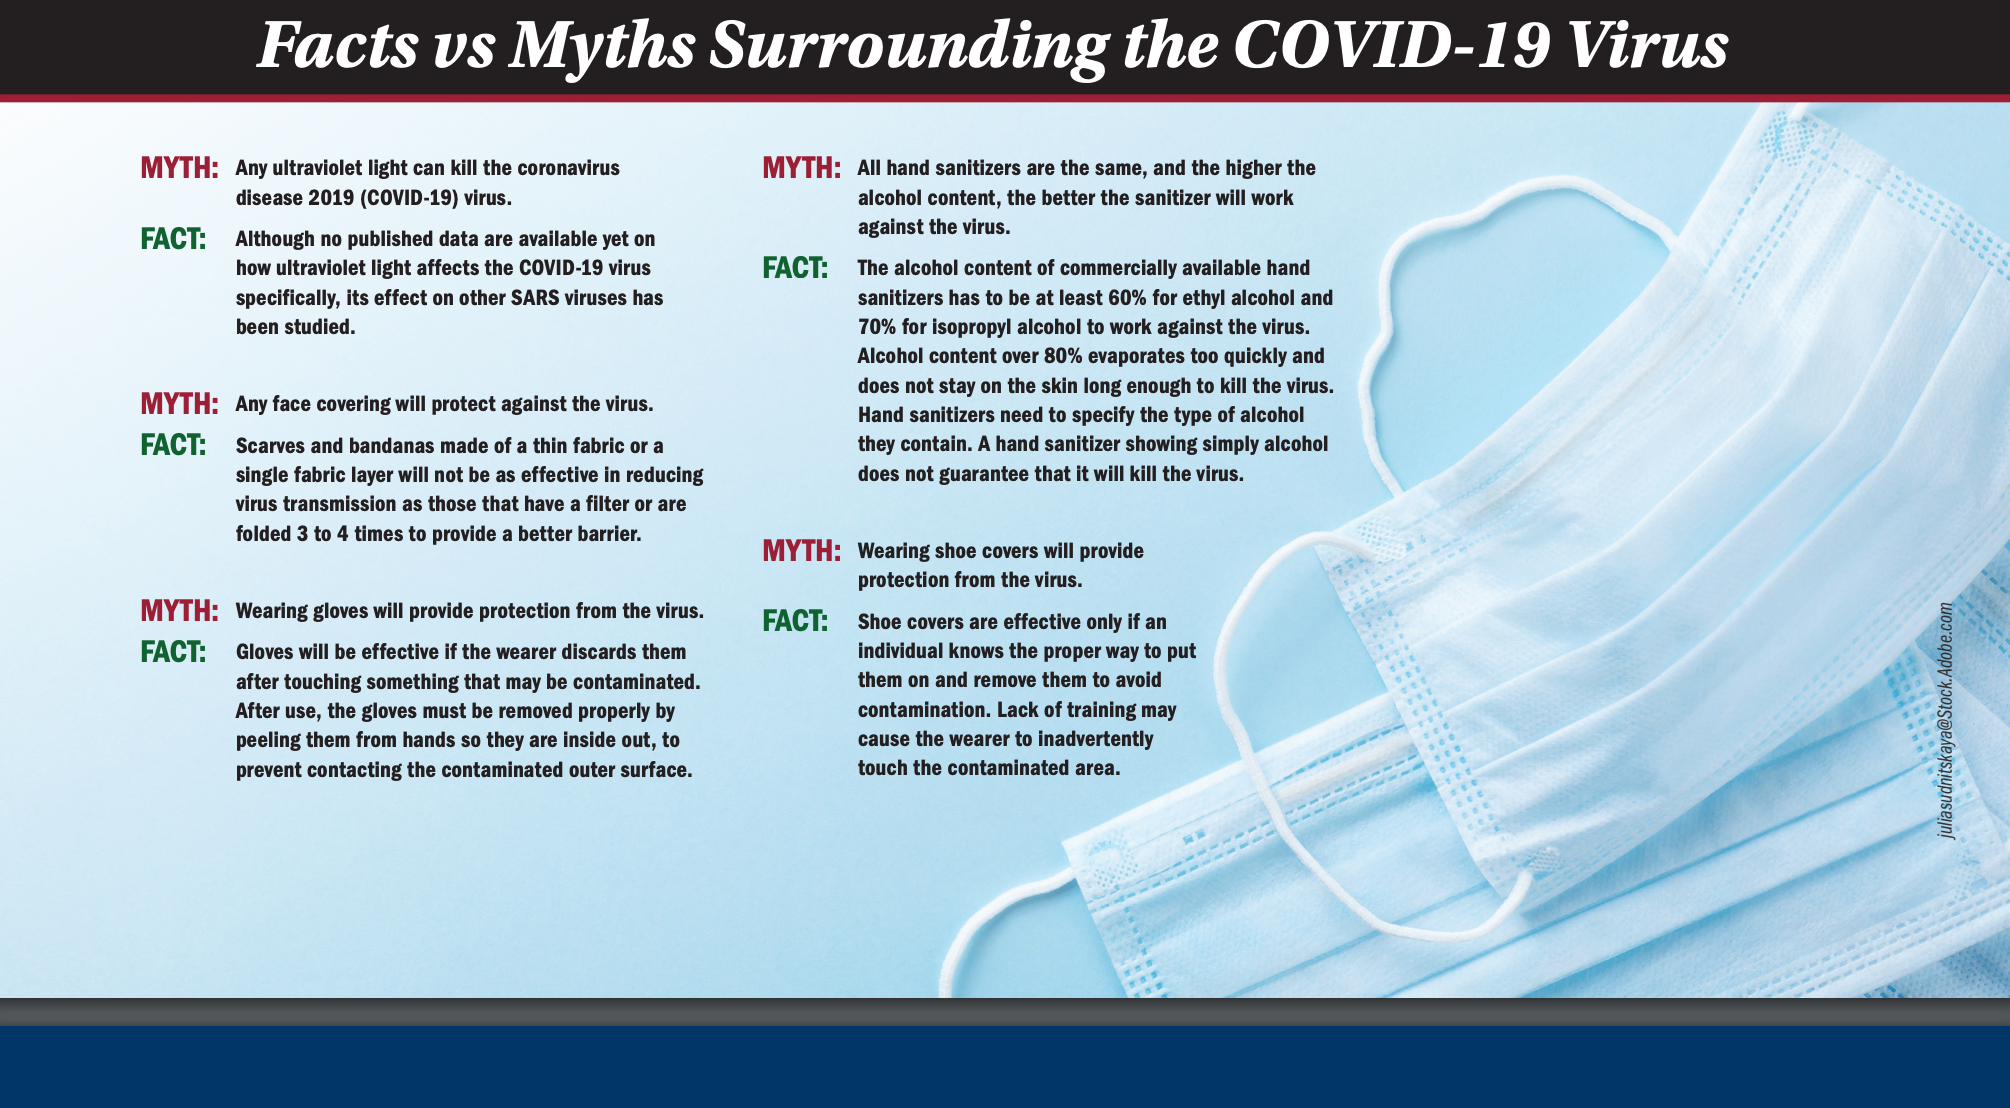 Facts and myths surrounding the COVID-19 virus